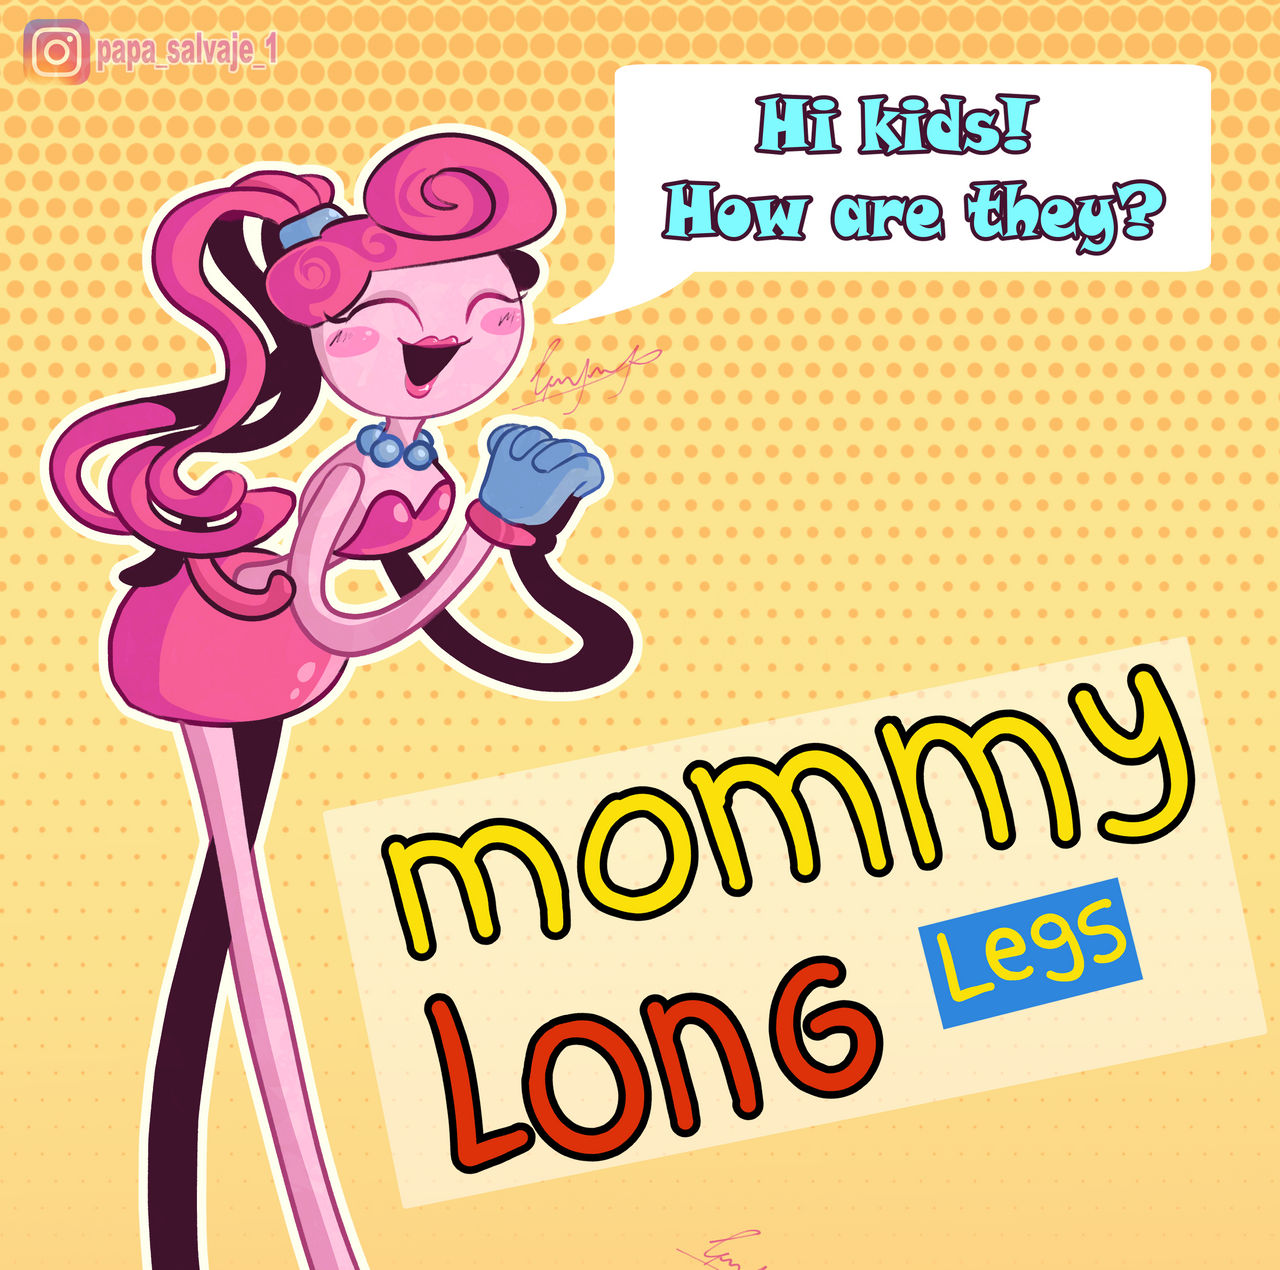 Mommy Long Legs: Princess of Playtime Co. by bdb5275 on DeviantArt